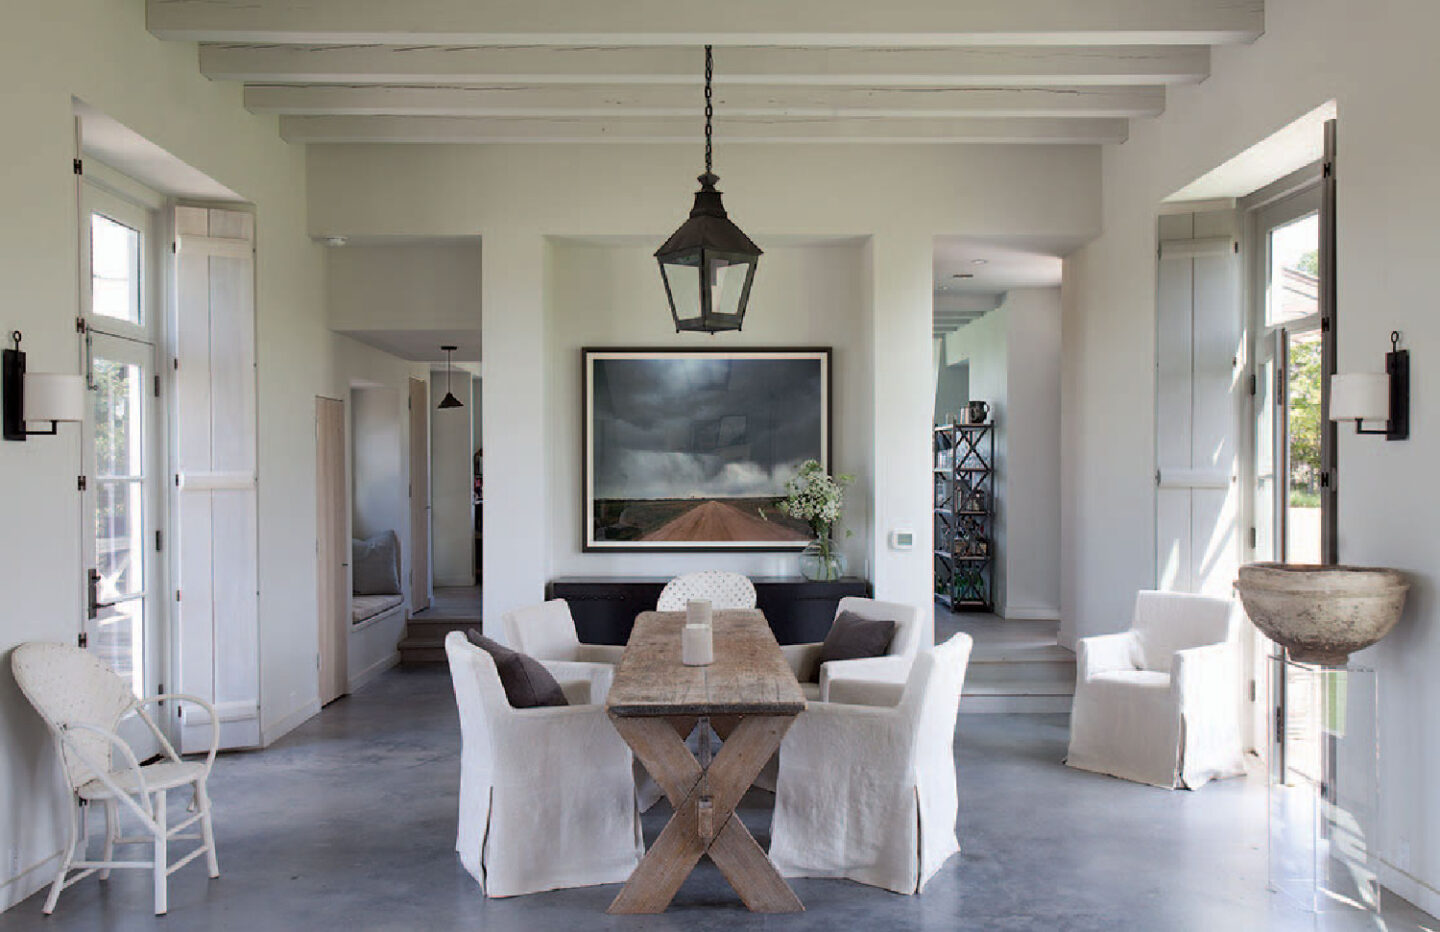 Modern French farmhouse dining area with antique orchard table in home near Round Top, TX, designed by Kirby Mears for Eleanor Cummings, interior designer.